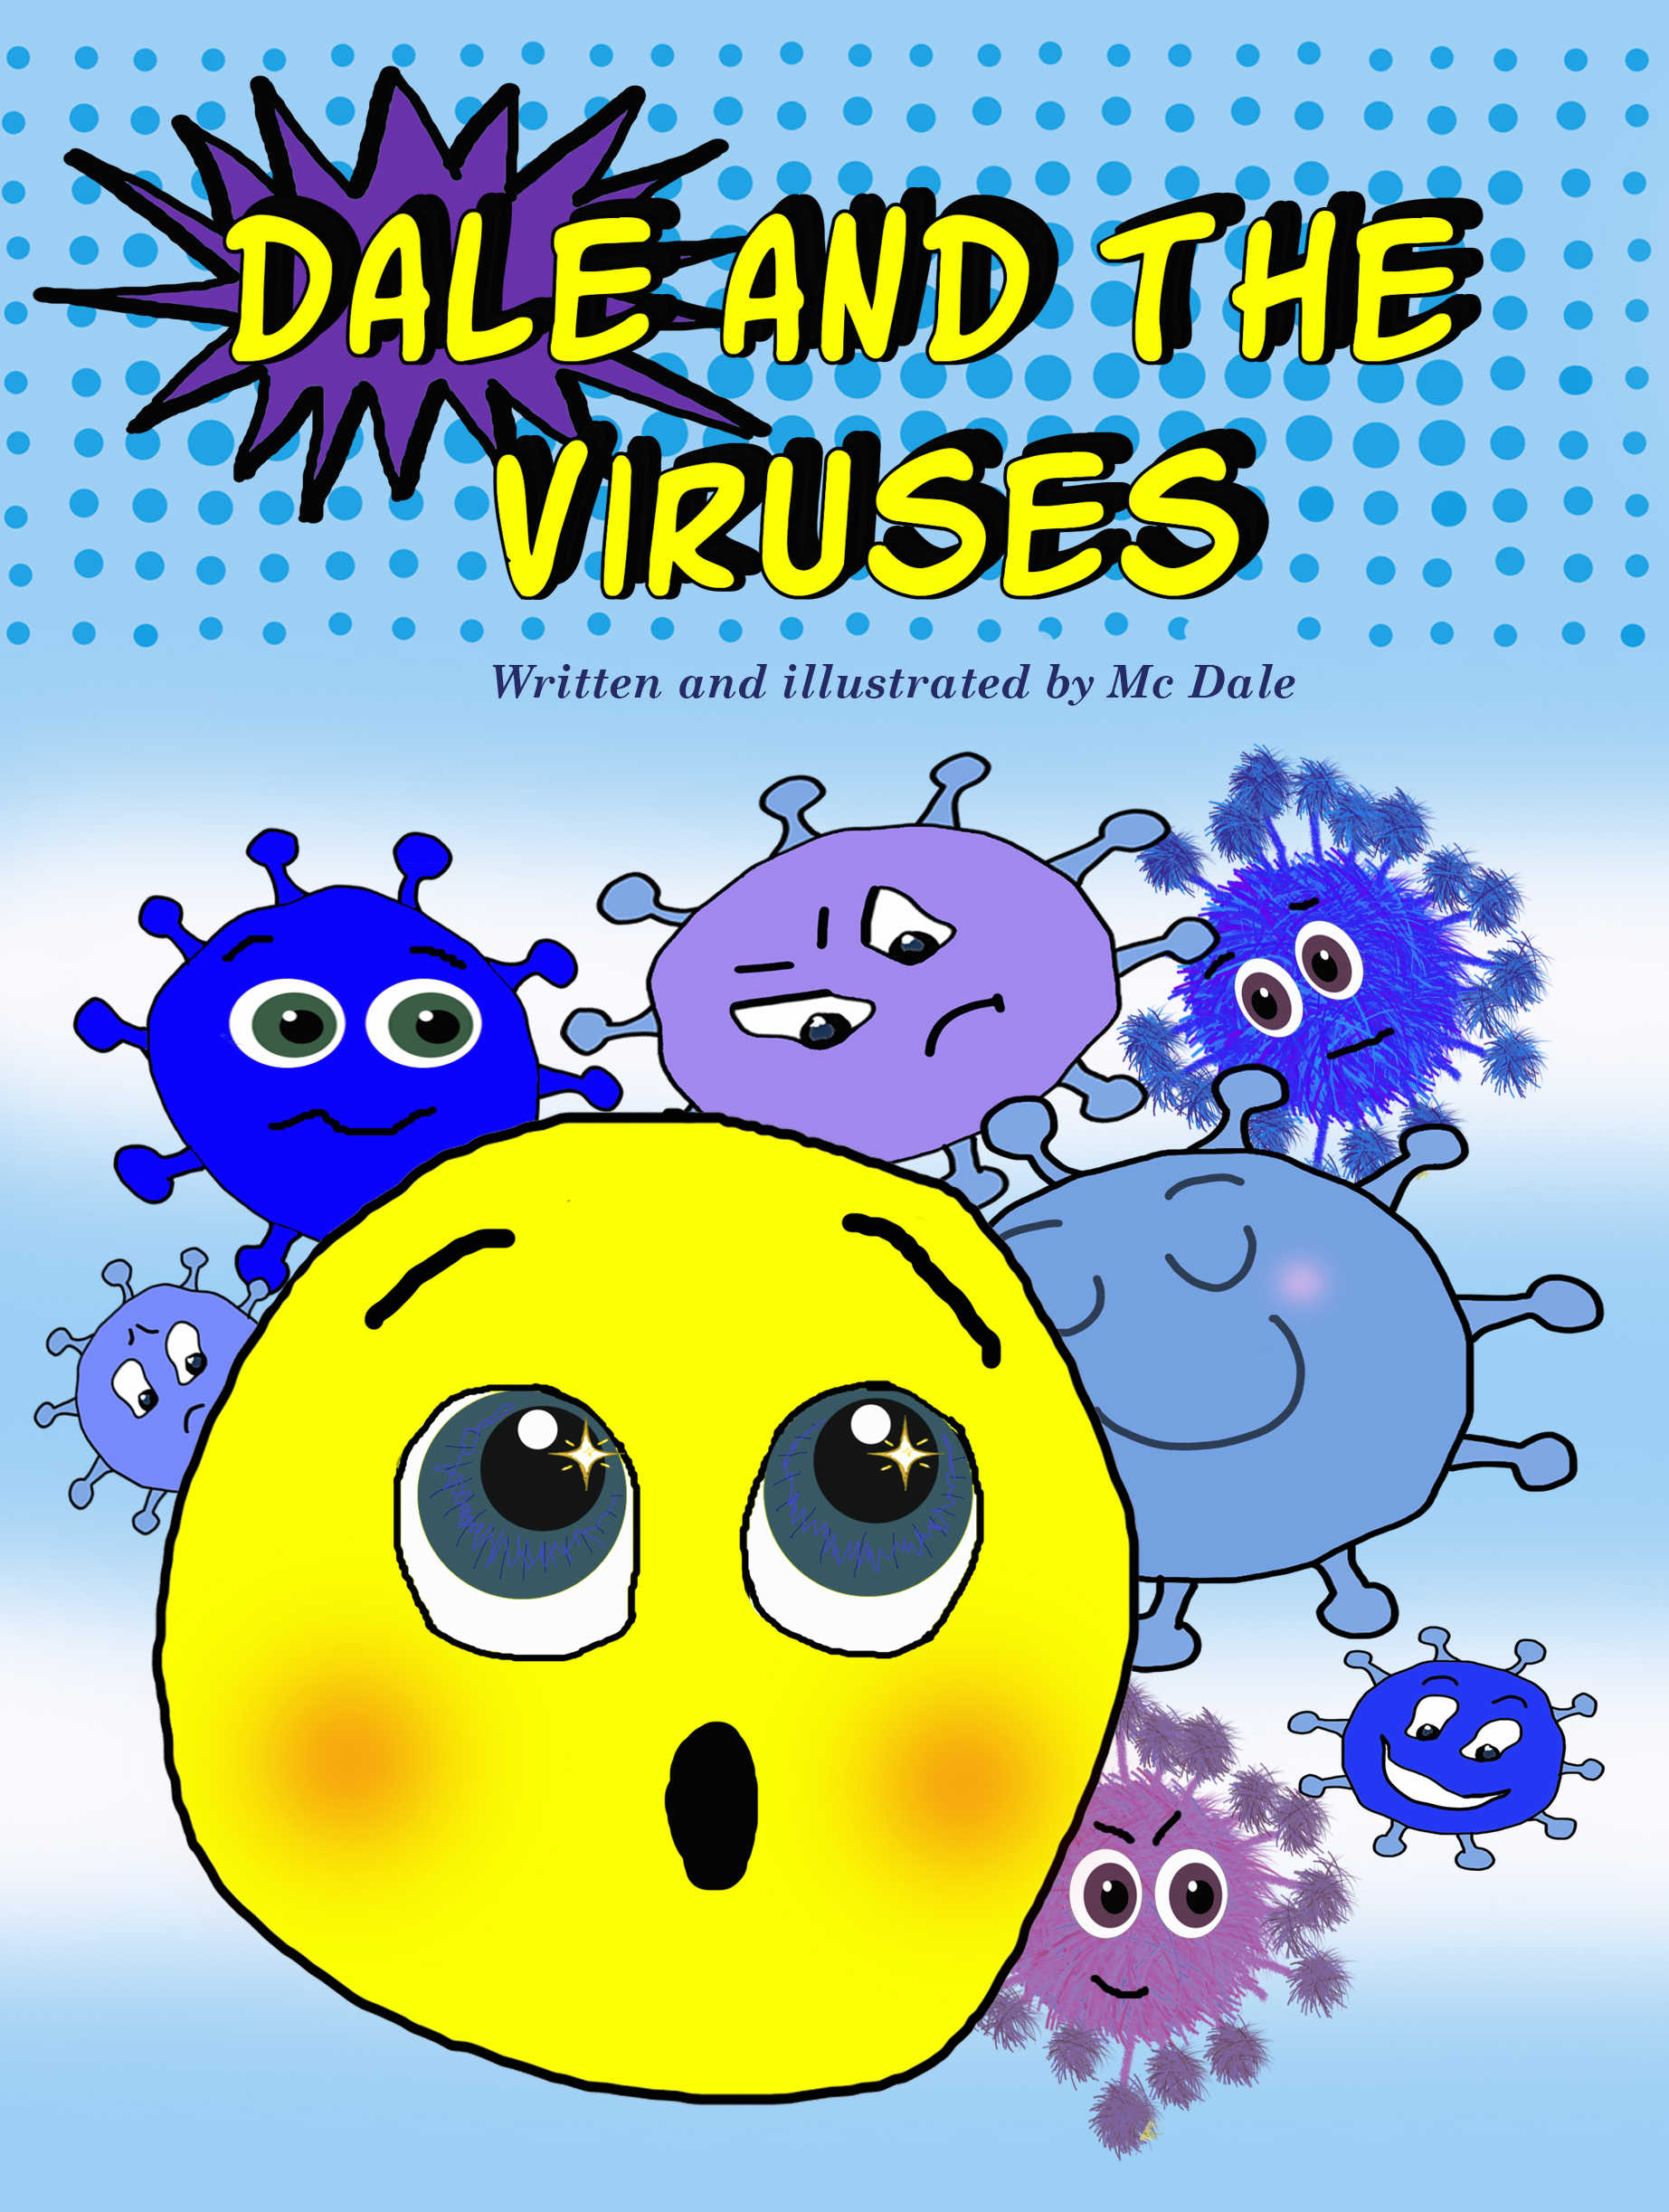 FREE: Dale and the Viruses by Mc Dale